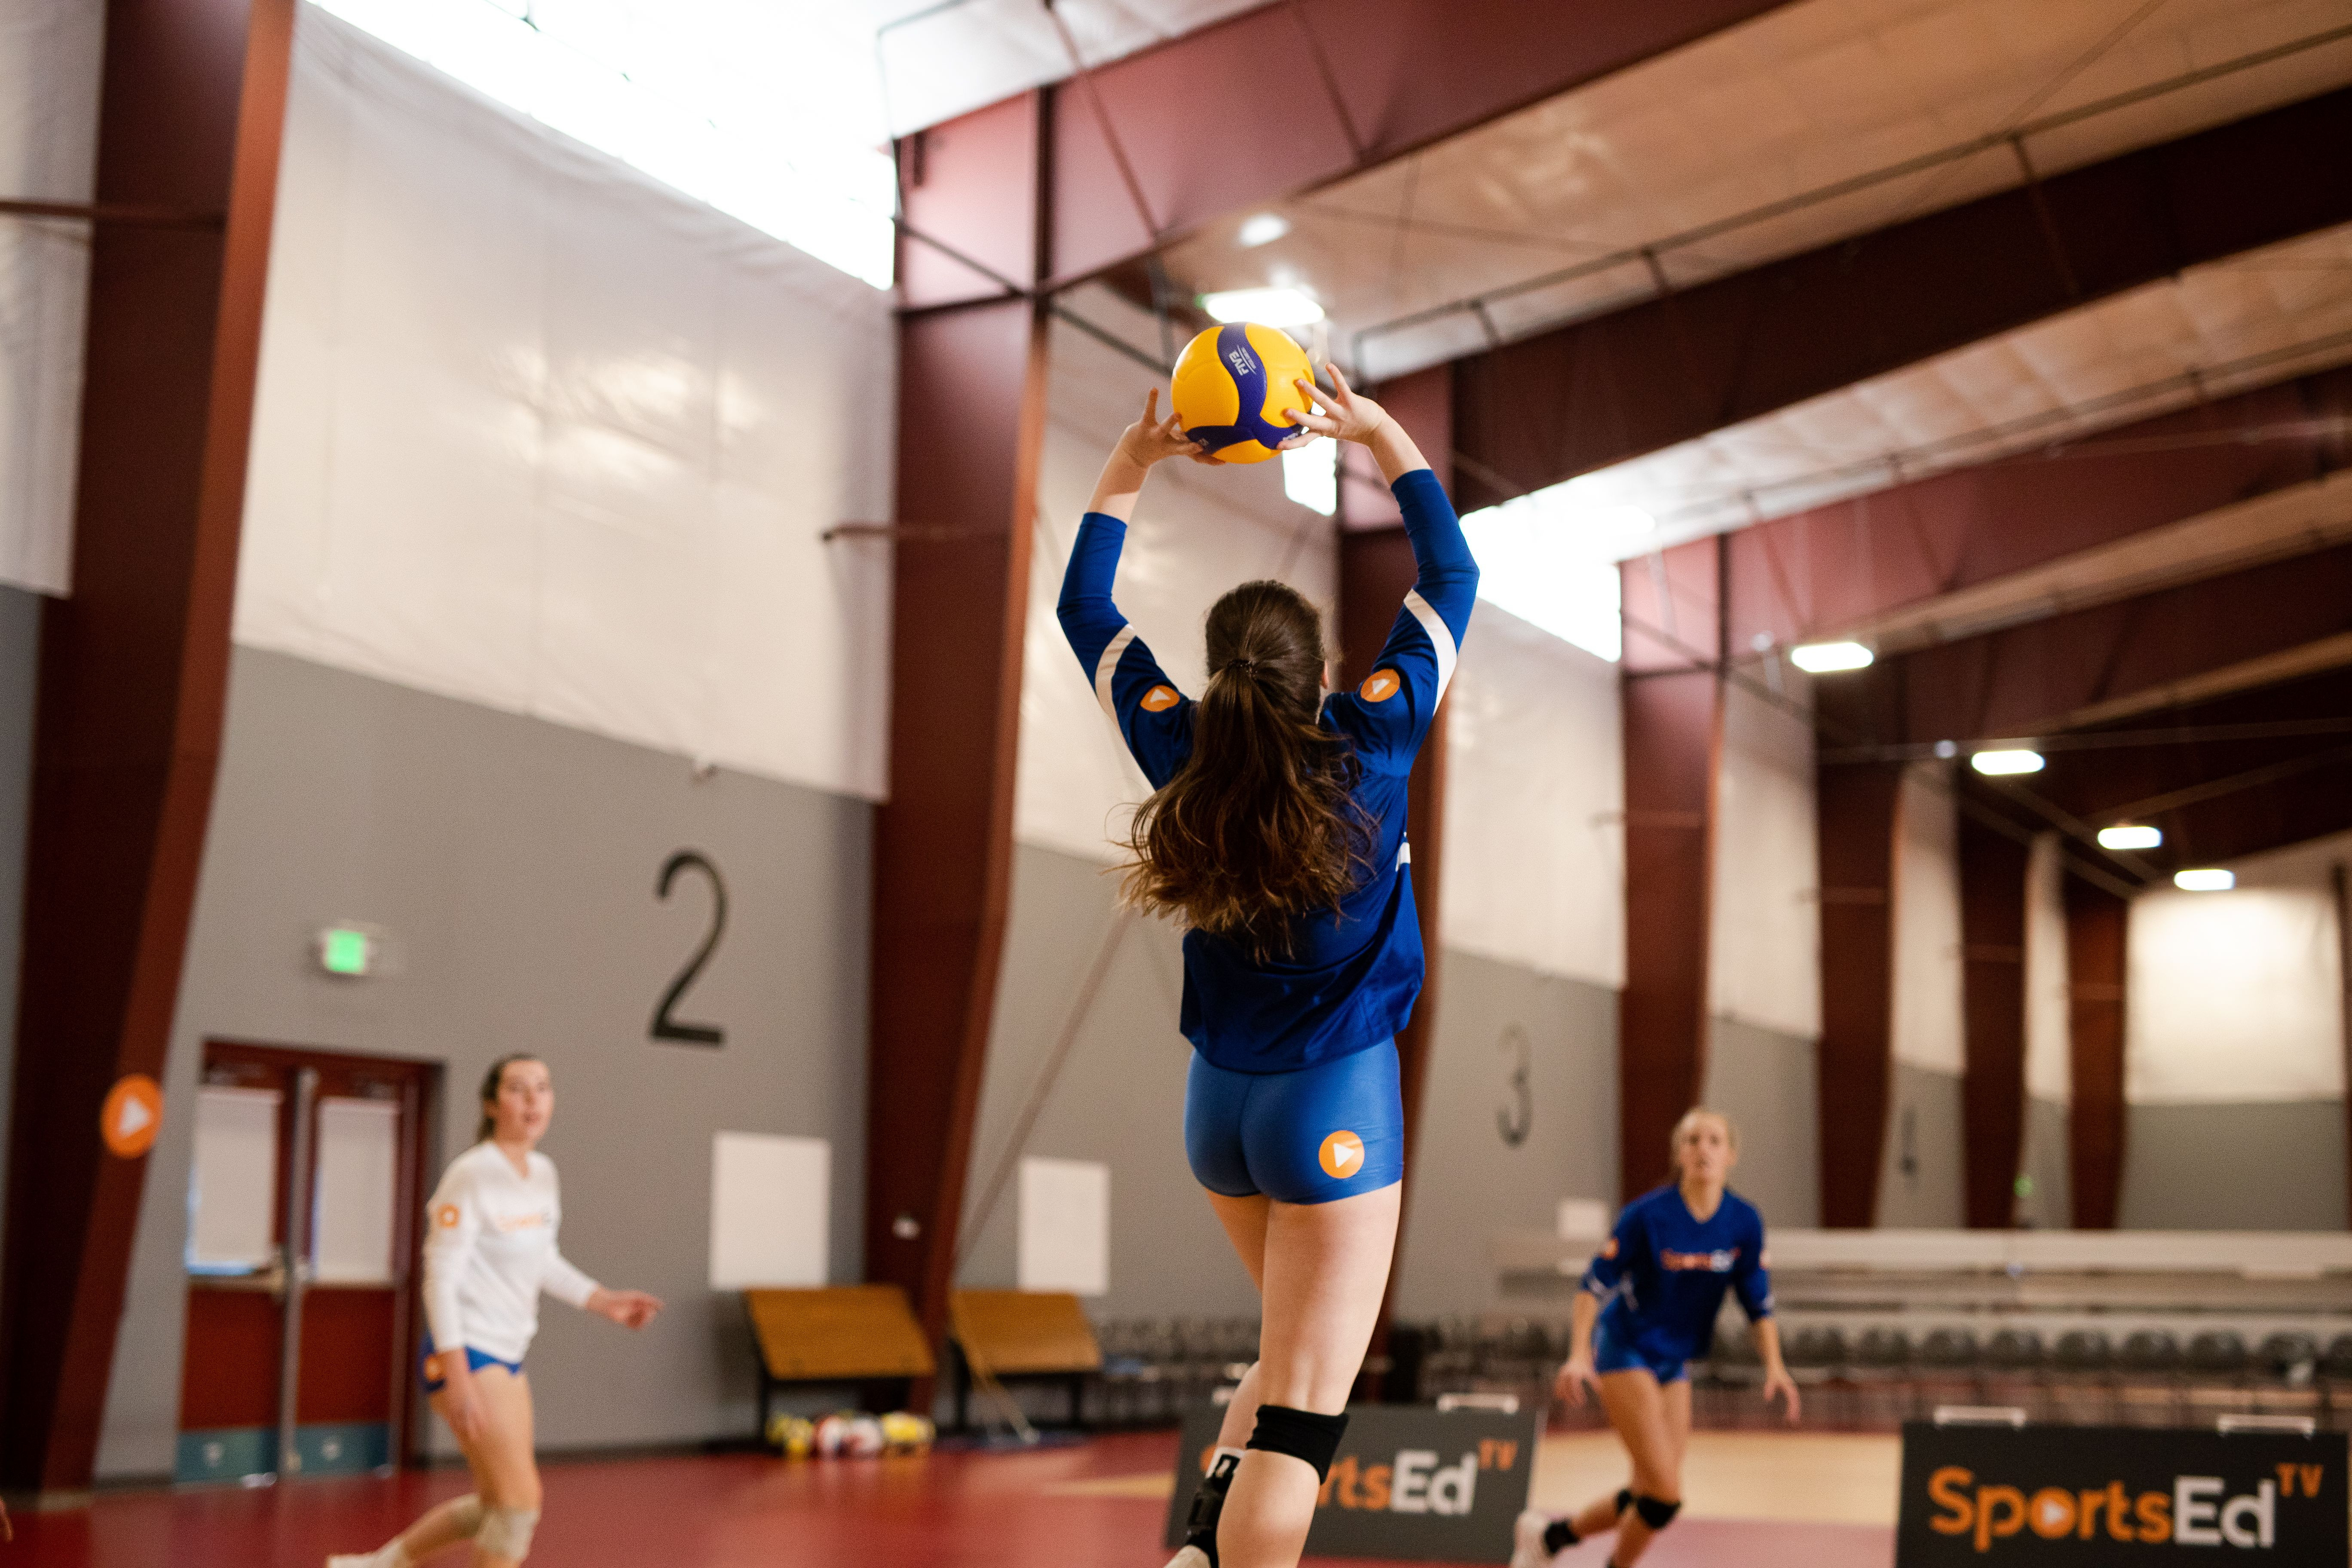 What factors determine victory in volleyball? Examining the 2019 Final Four NCAA Women's Championship by Leandro Dutra & Gylton Da Matta Ph.D.